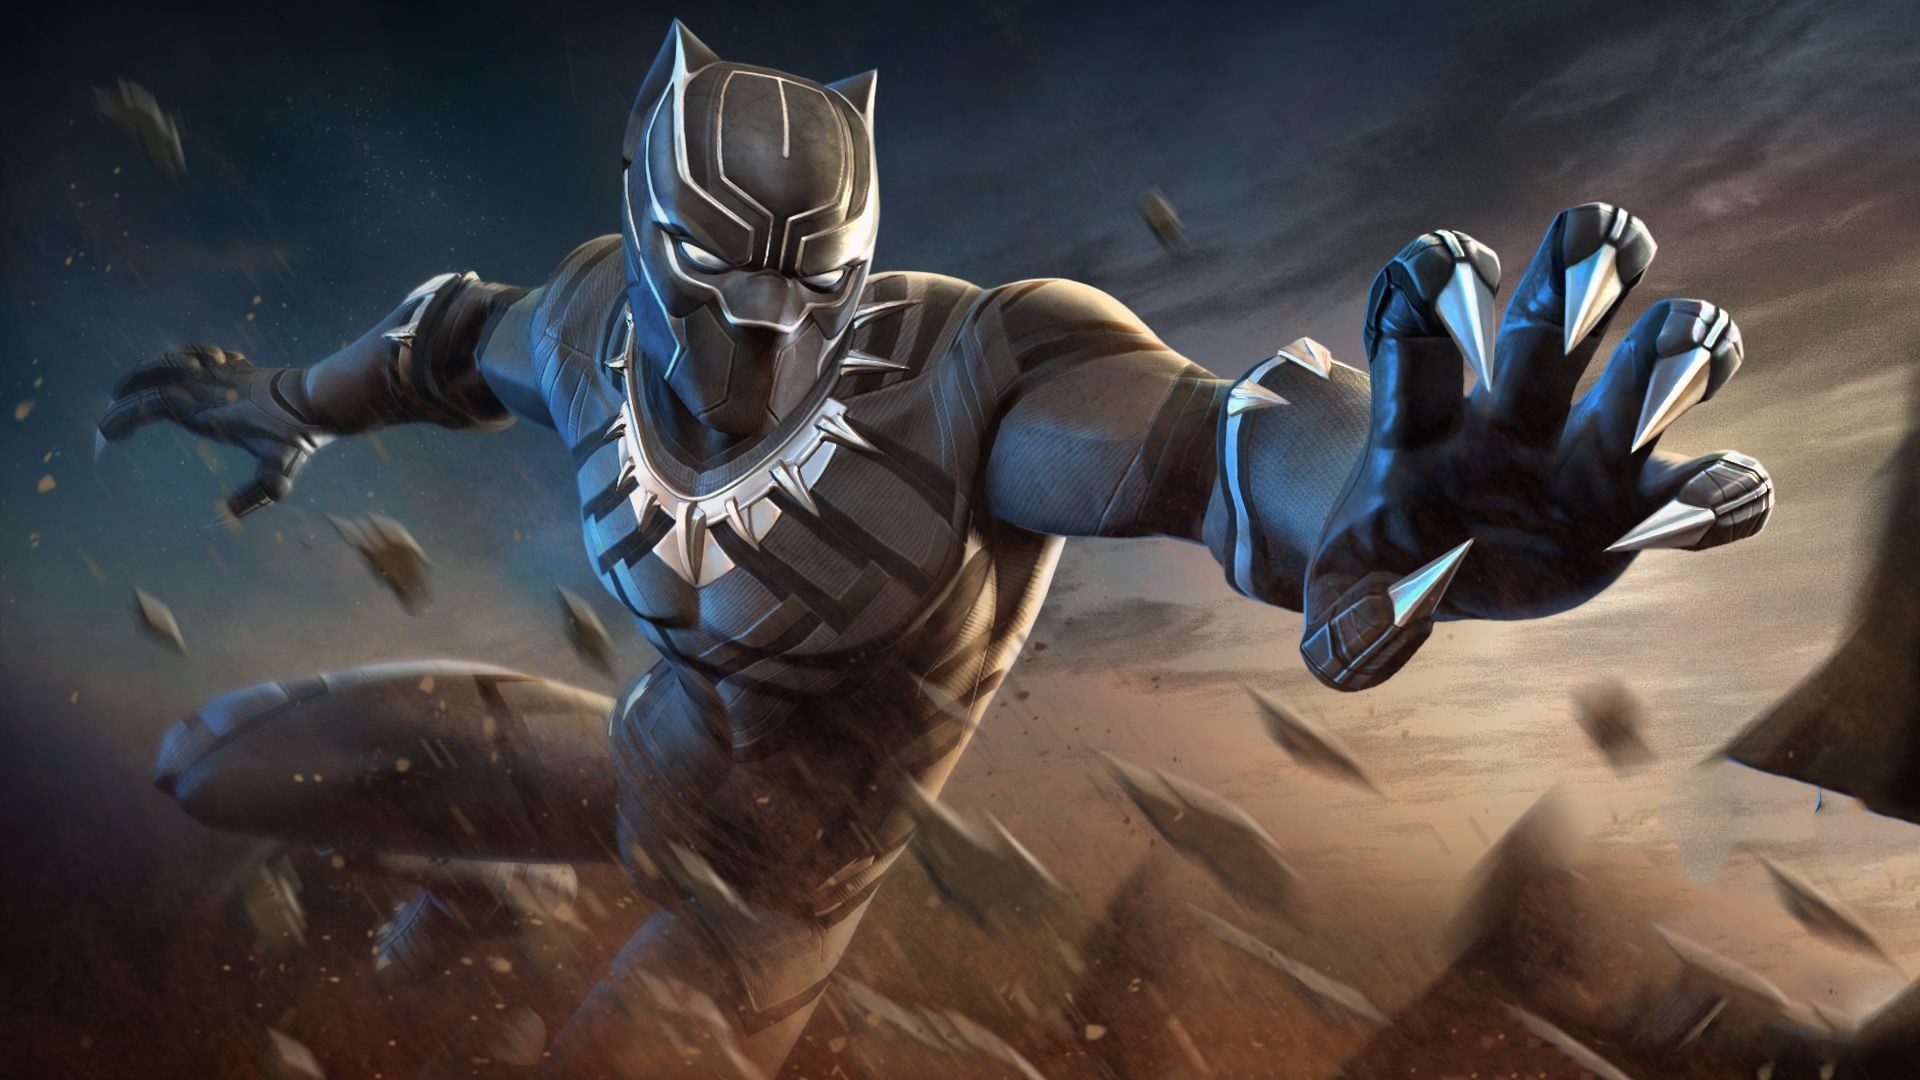 HD Black Panther Wallpaper with high-resolution 1920x1080 pixel. You can use this poster wallpaper for your Desktop Computers, Mac Screensavers, Windows Backgrounds, iPhone Wallpapers, Tablet or Android Lock screen and another Mobile device